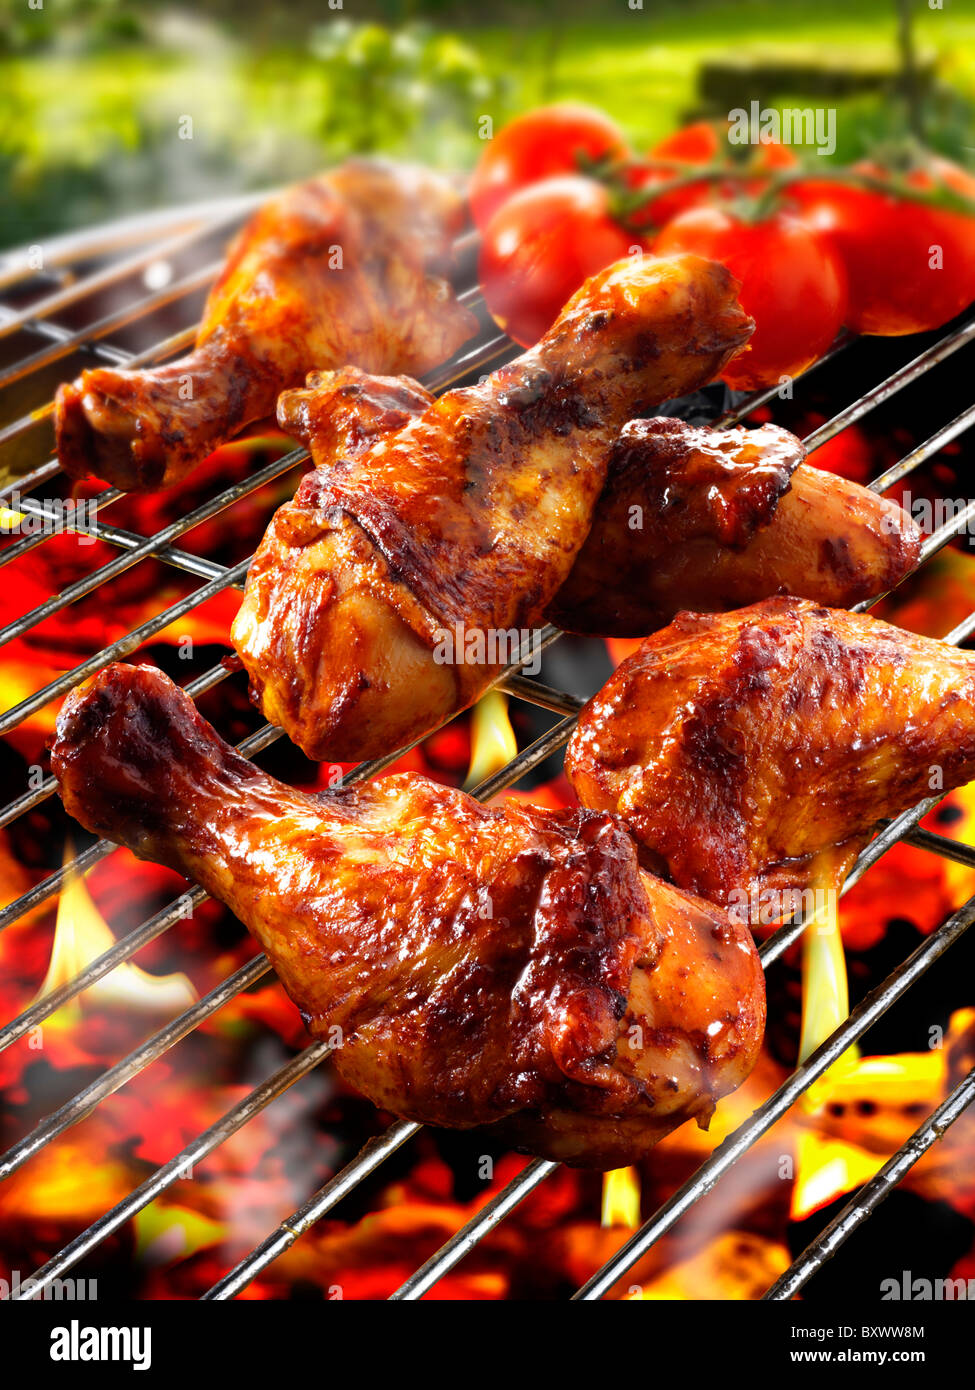 Barbecue chicken legs & thighs on a BBQ grill Stock Photo, Royalty Free ...